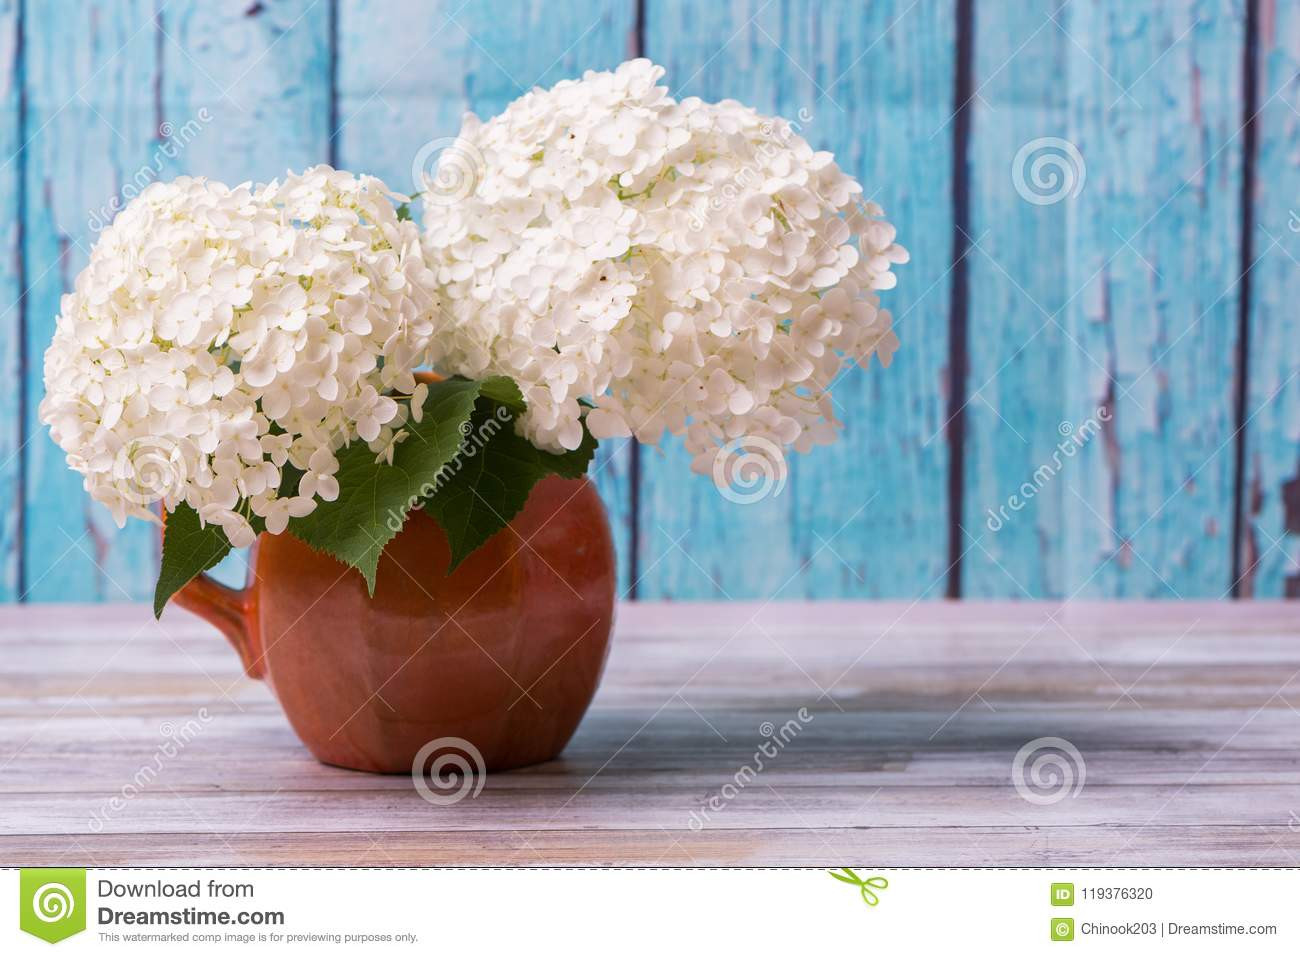 10 Nice White Pitcher Vase with Flowers 2024 free download white pitcher vase with flowers of white hydrangea flowers in a rustic vase with blue background stock intended for white hydrangea flowers in a rustic vase with blue background